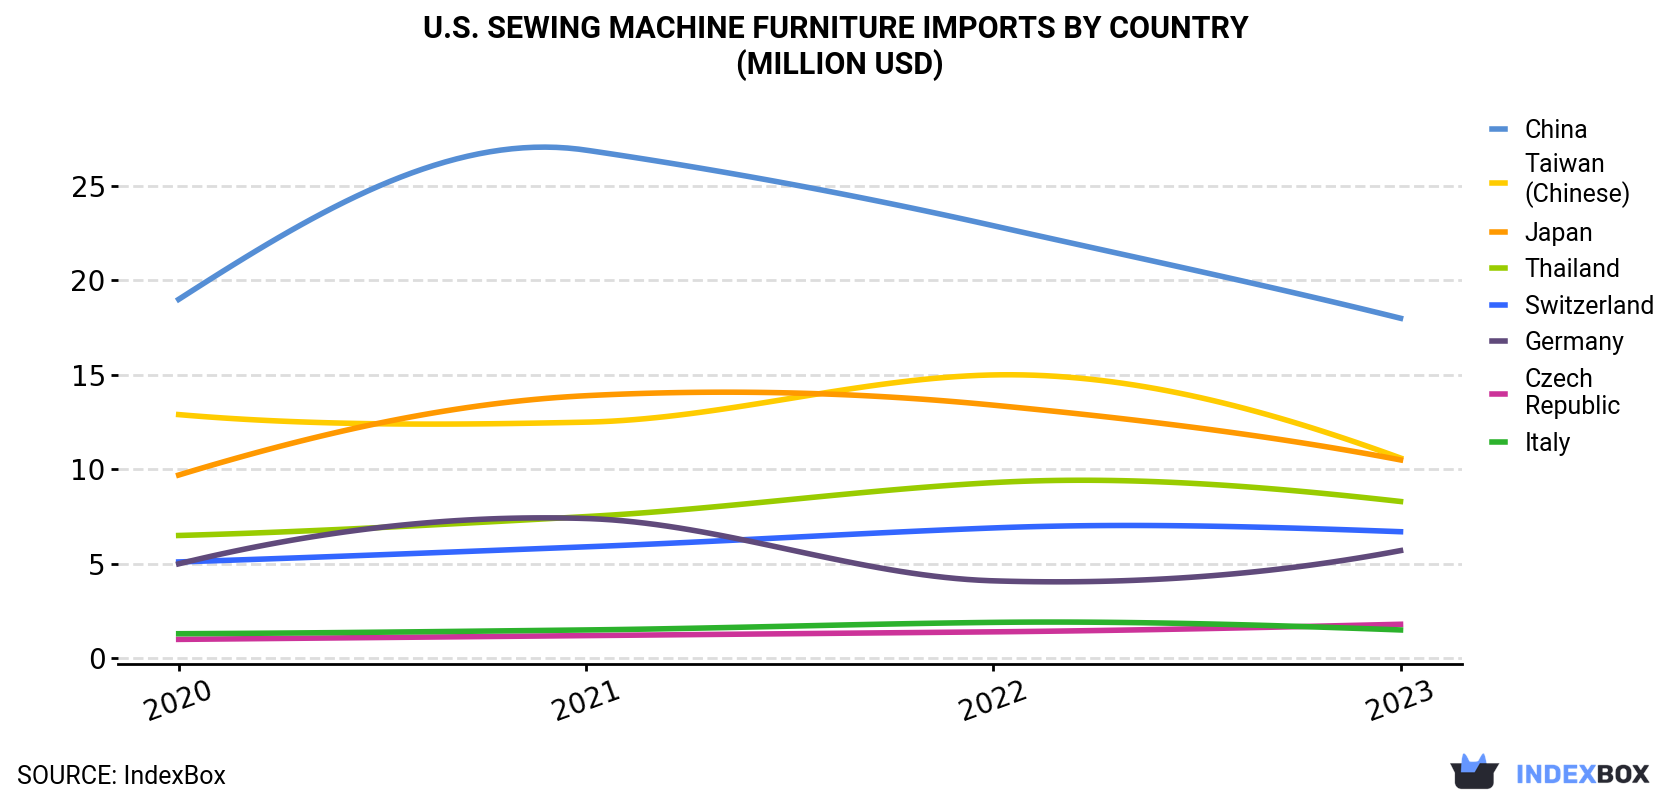 U.S. Sewing Machine Furniture Imports By Country (Million USD)